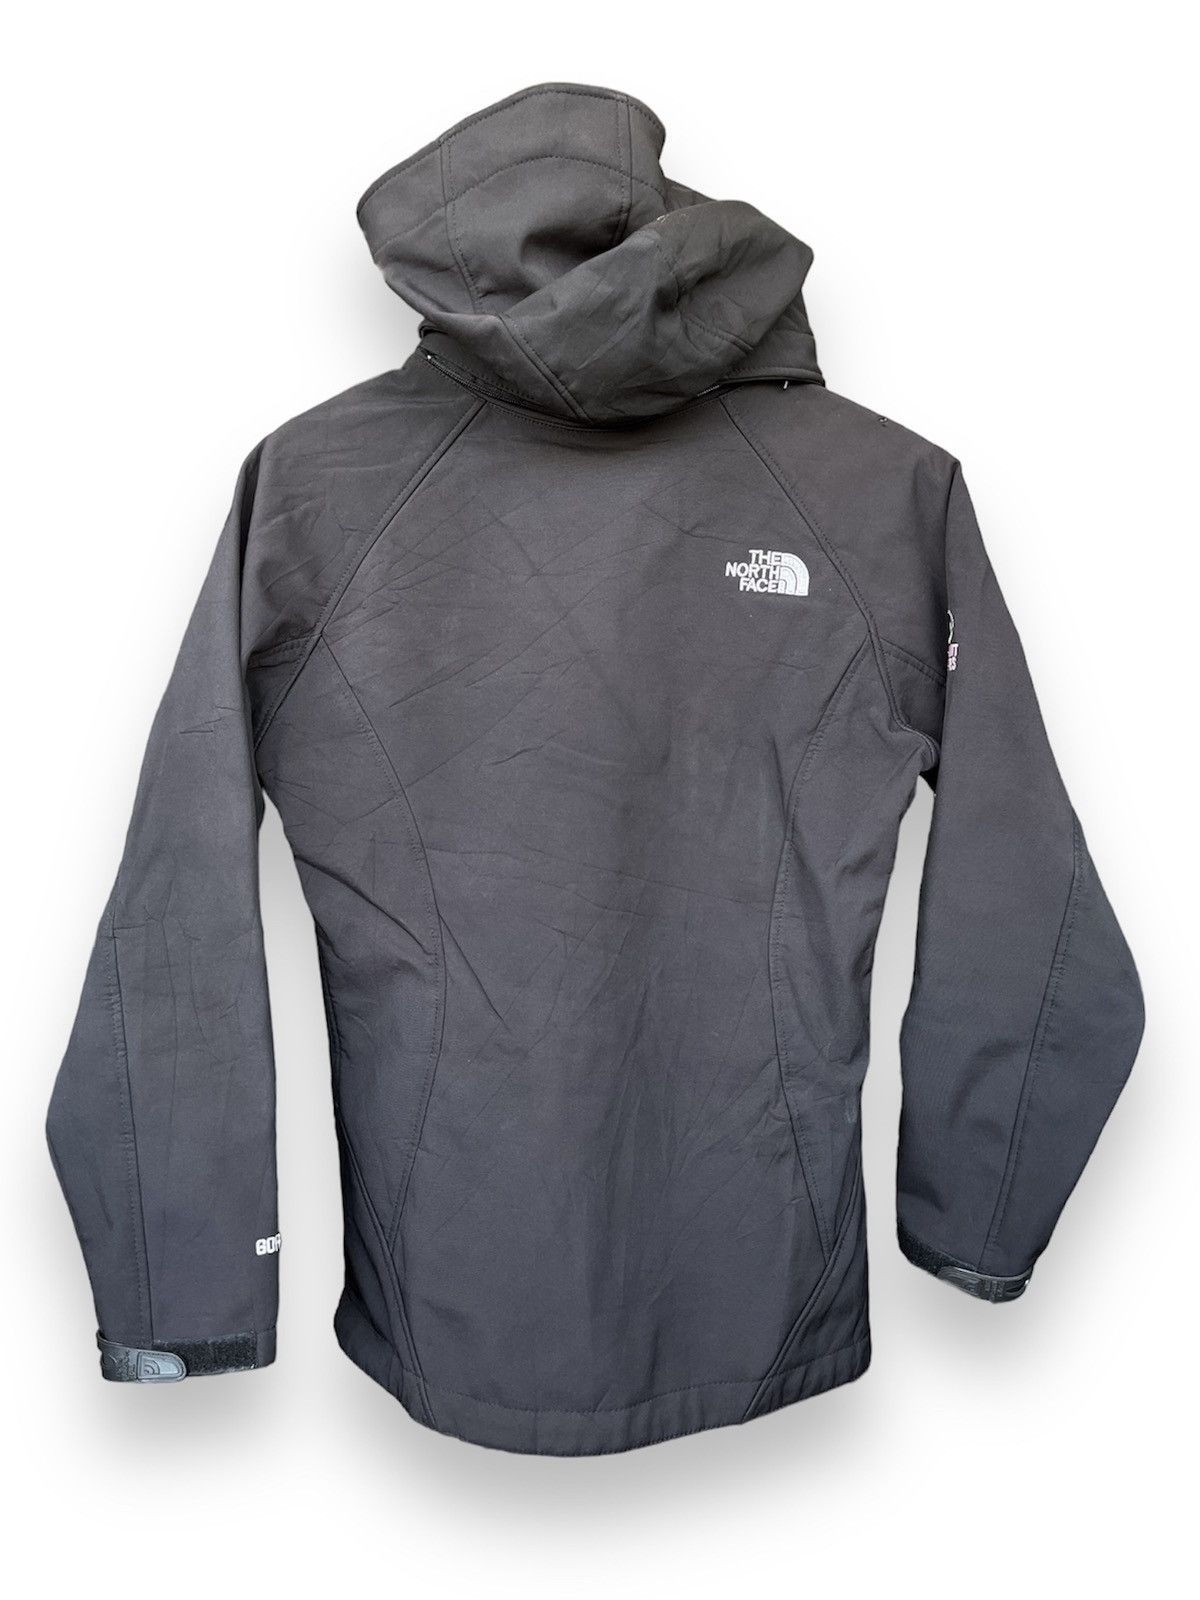 Outdoor Style Go Out! - The North Face X Goretex Summit Series Jacket - 22